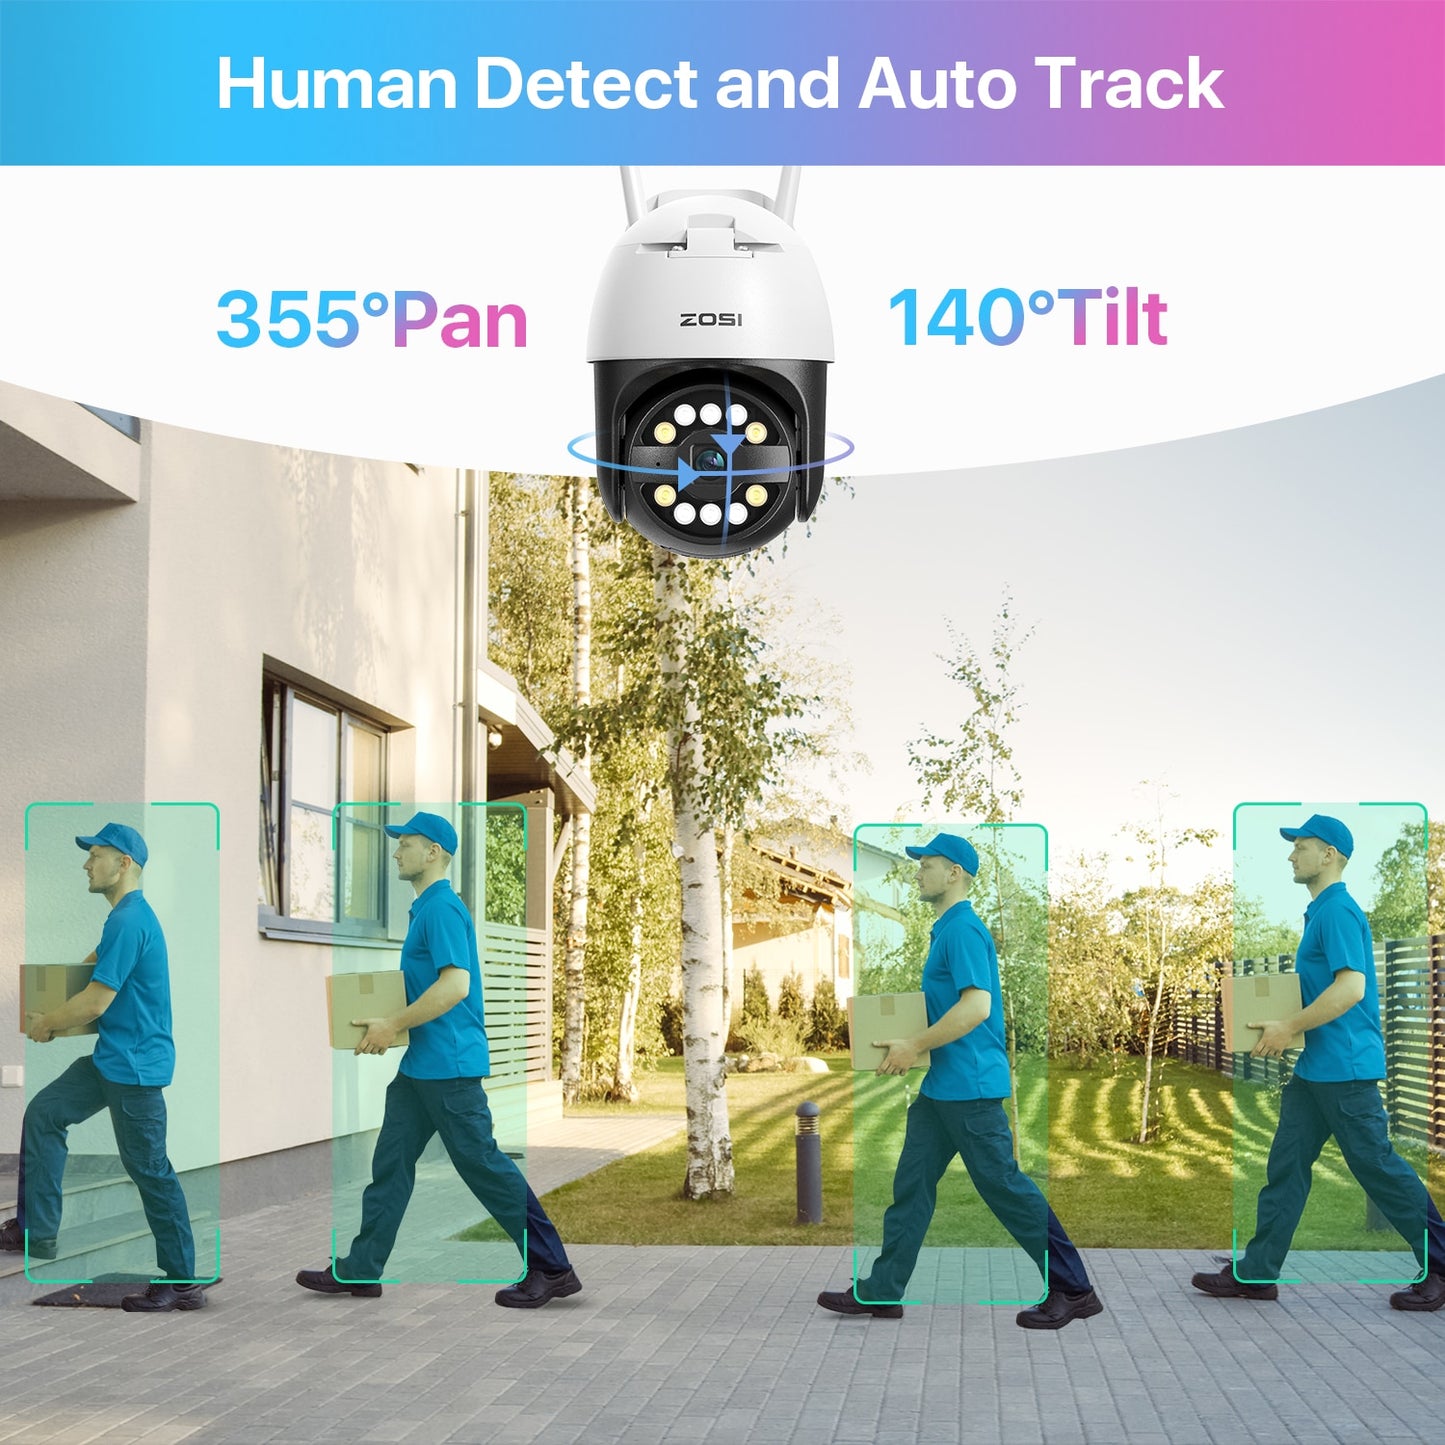 ZOSI C296 5MP PTZ Camera Wifi Person Vehicle Pet Package Detect Wireless CCTV Video Surveillance Camera Home Security Protection